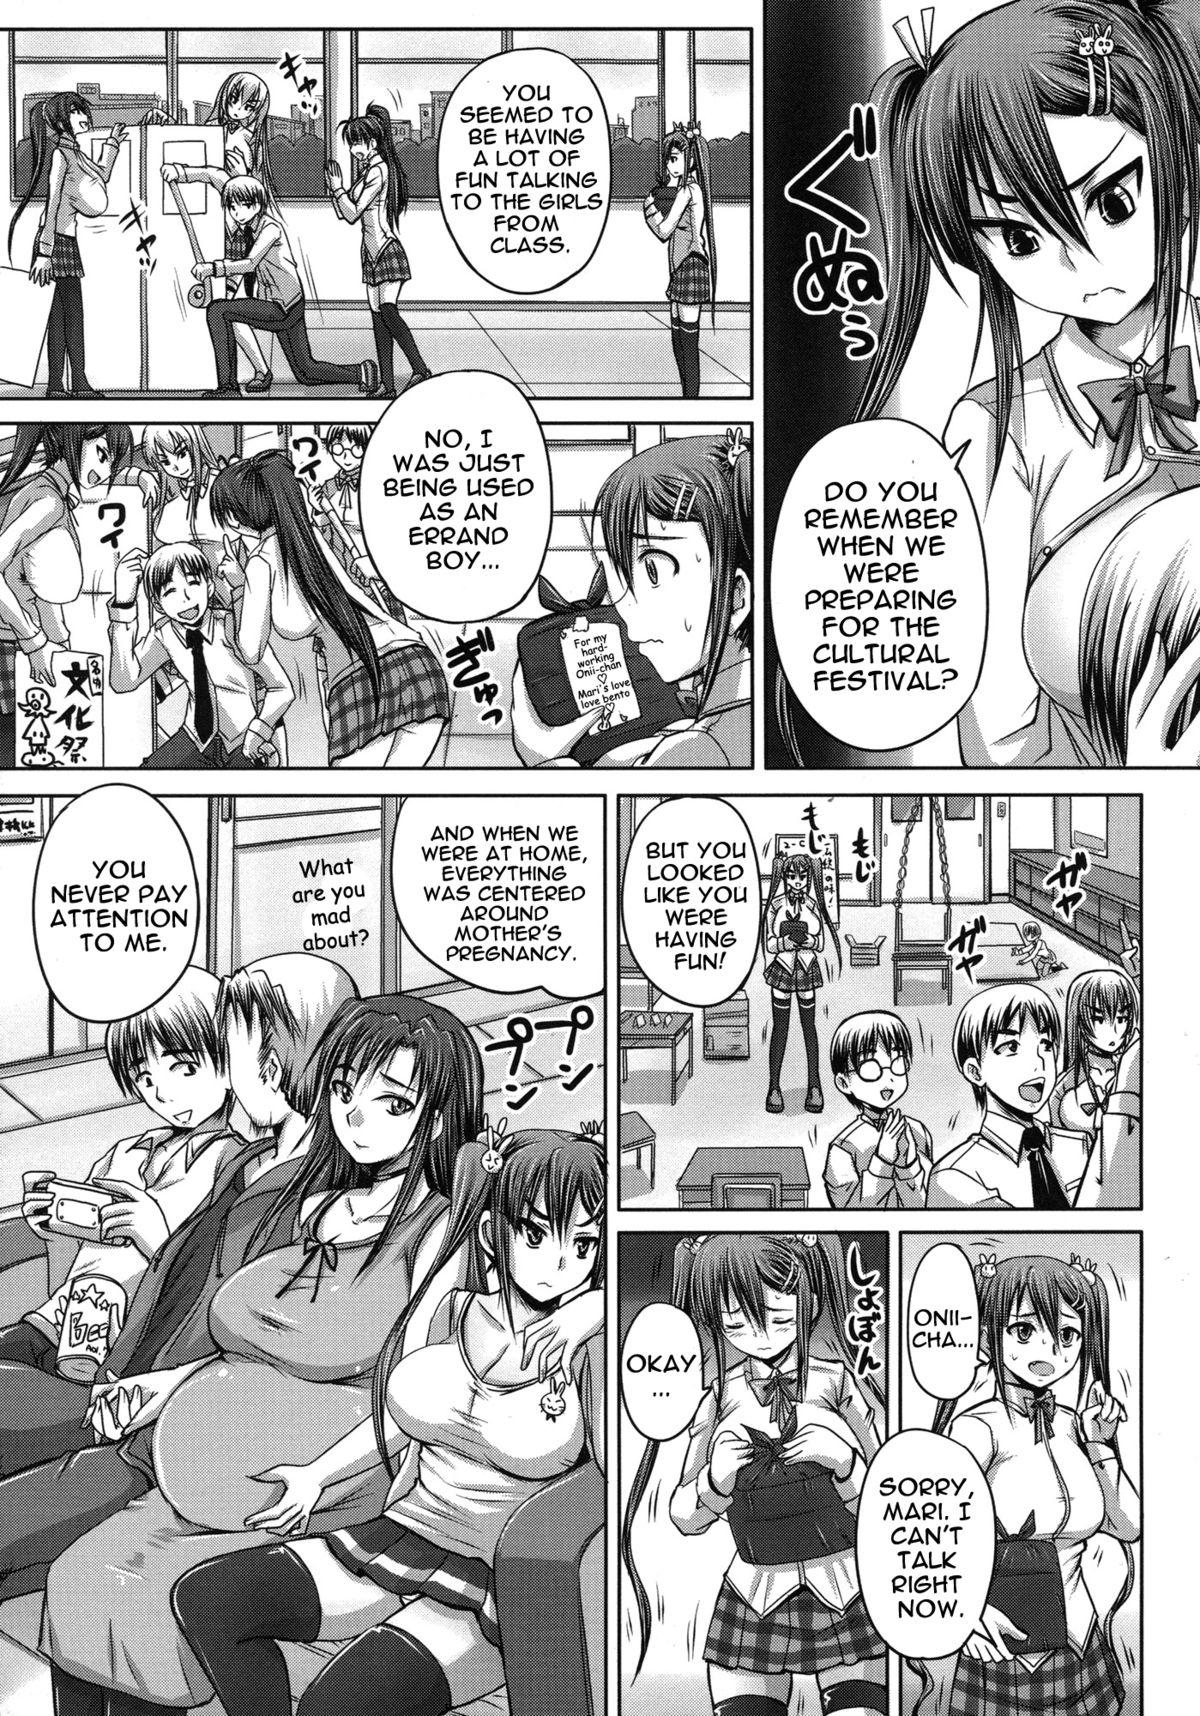 [Akigami Satoru] Tsukurou! Onaho Ane - Let's made a Sex Sleeve from Sister | Turning My Elder-Sister into a Sex-Sleeve [English] {doujin-moe.us} 93